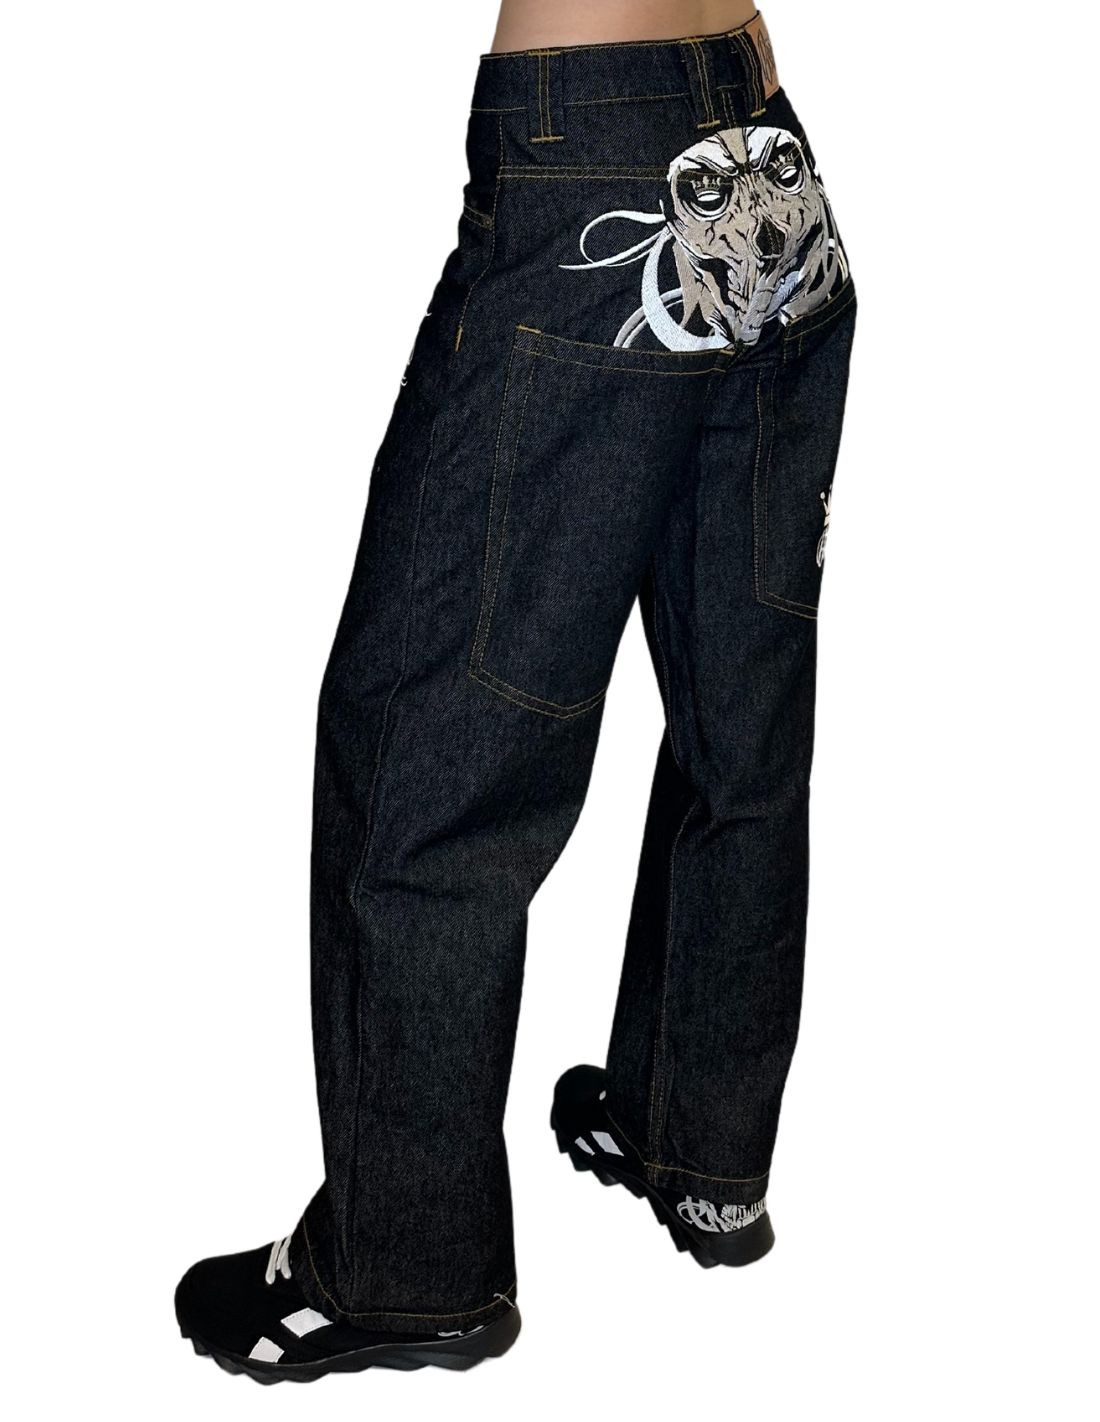 Skull Embroidery Baggy Jeans *limited edition* by BSAT